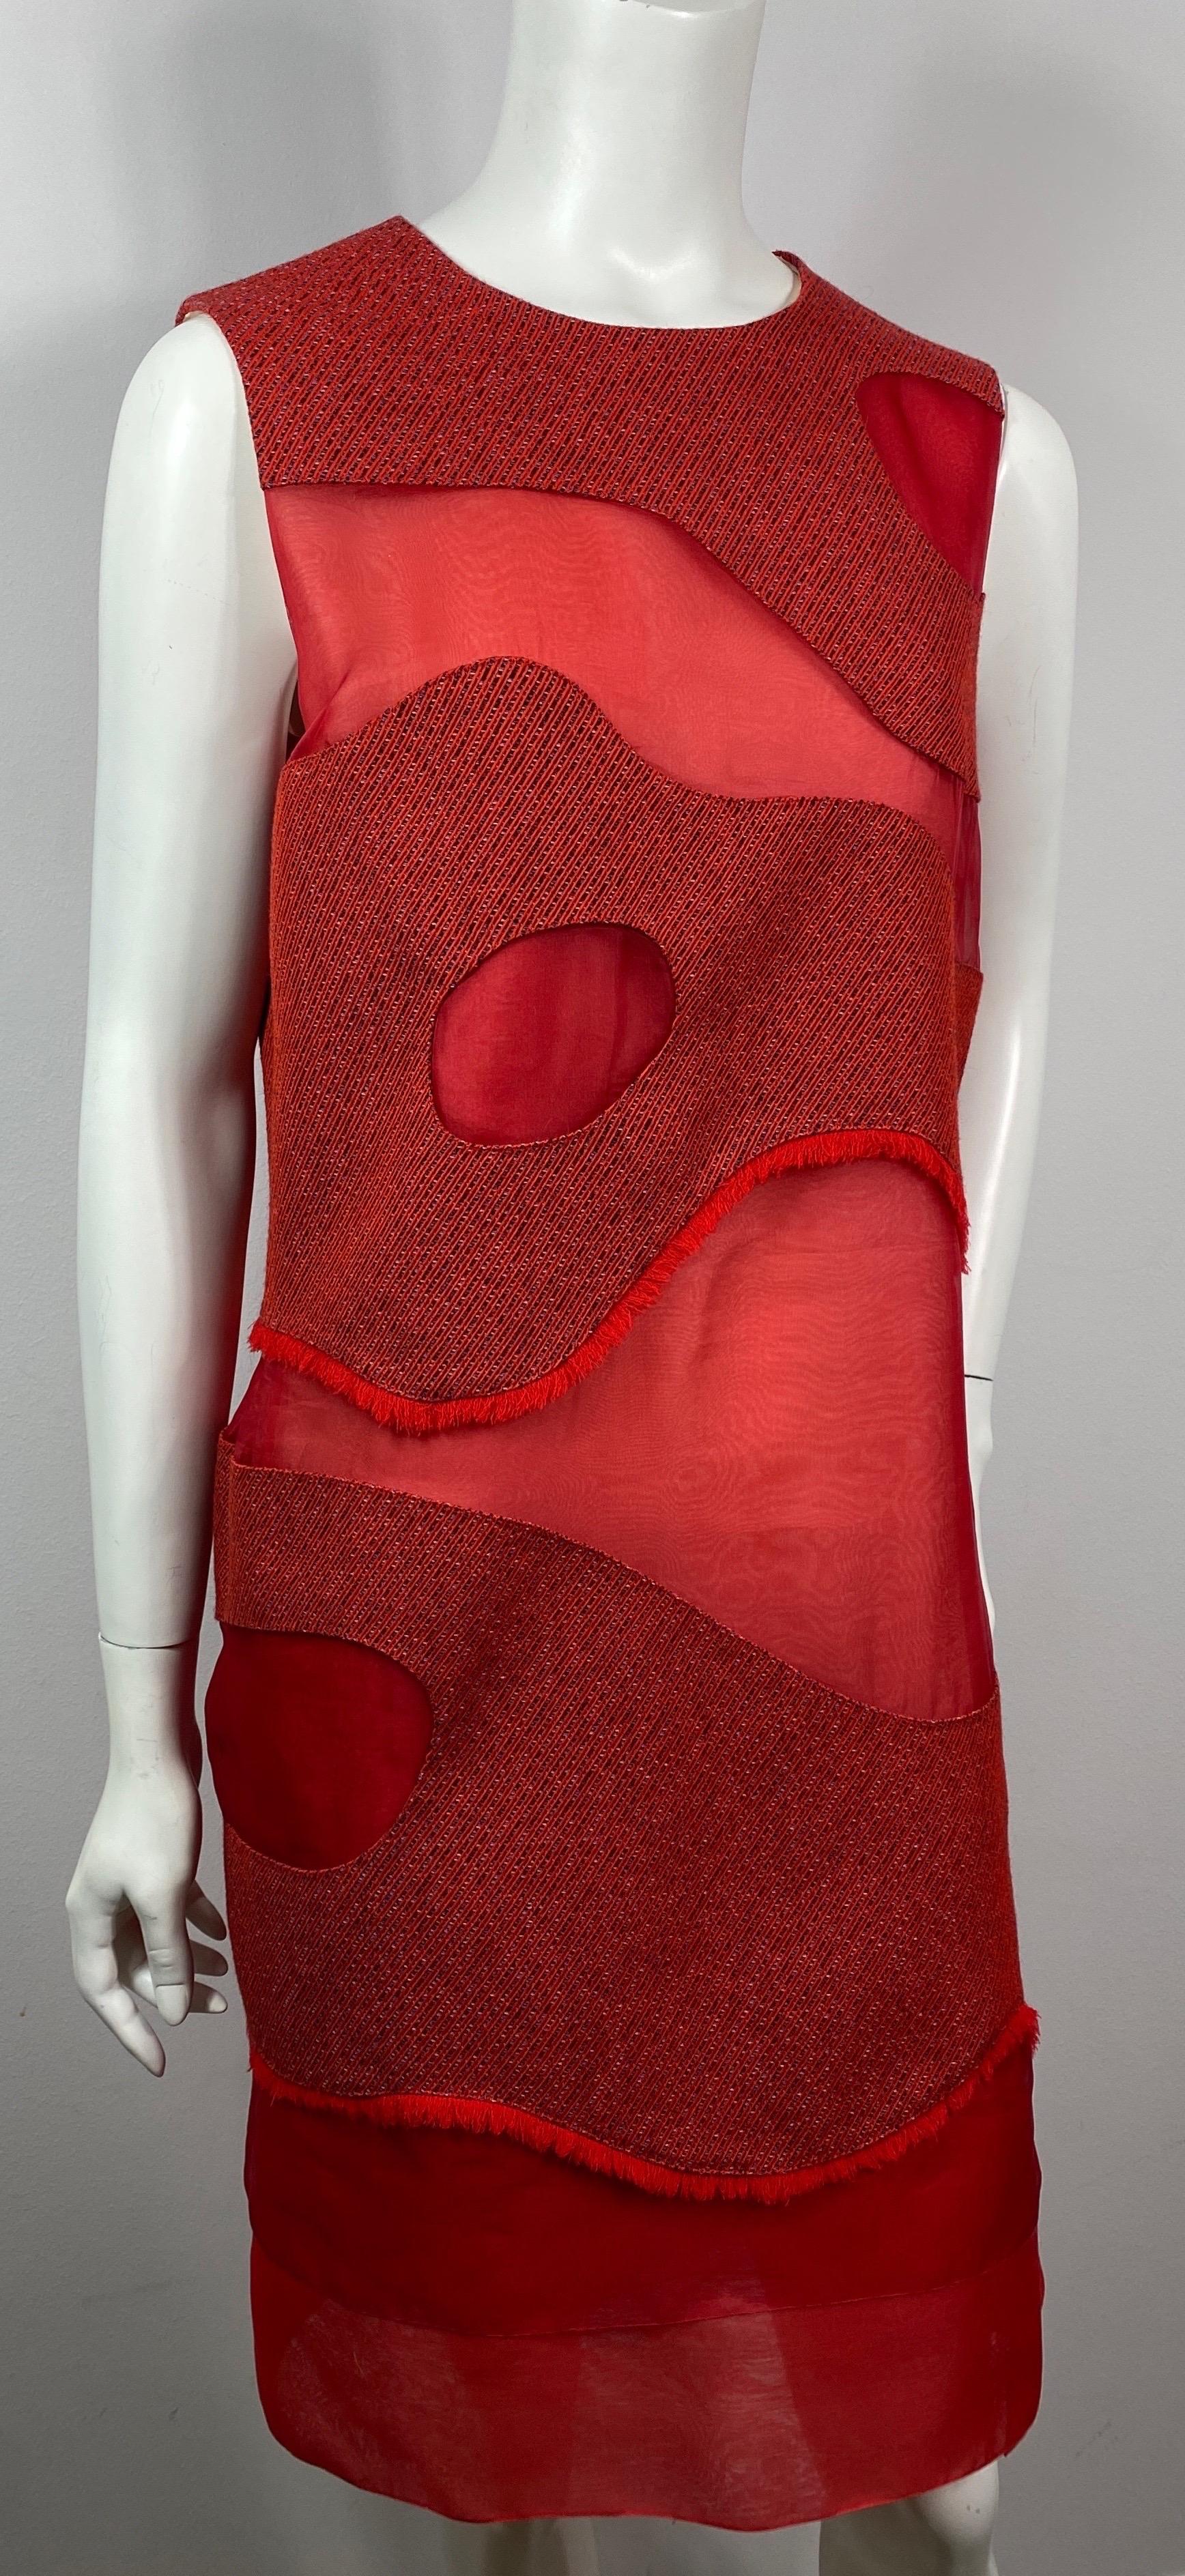 Christian Dior Runway Fall 2015 Red Multi Layer Silk Shift Dress - US Size 8 In Excellent Condition For Sale In West Palm Beach, FL